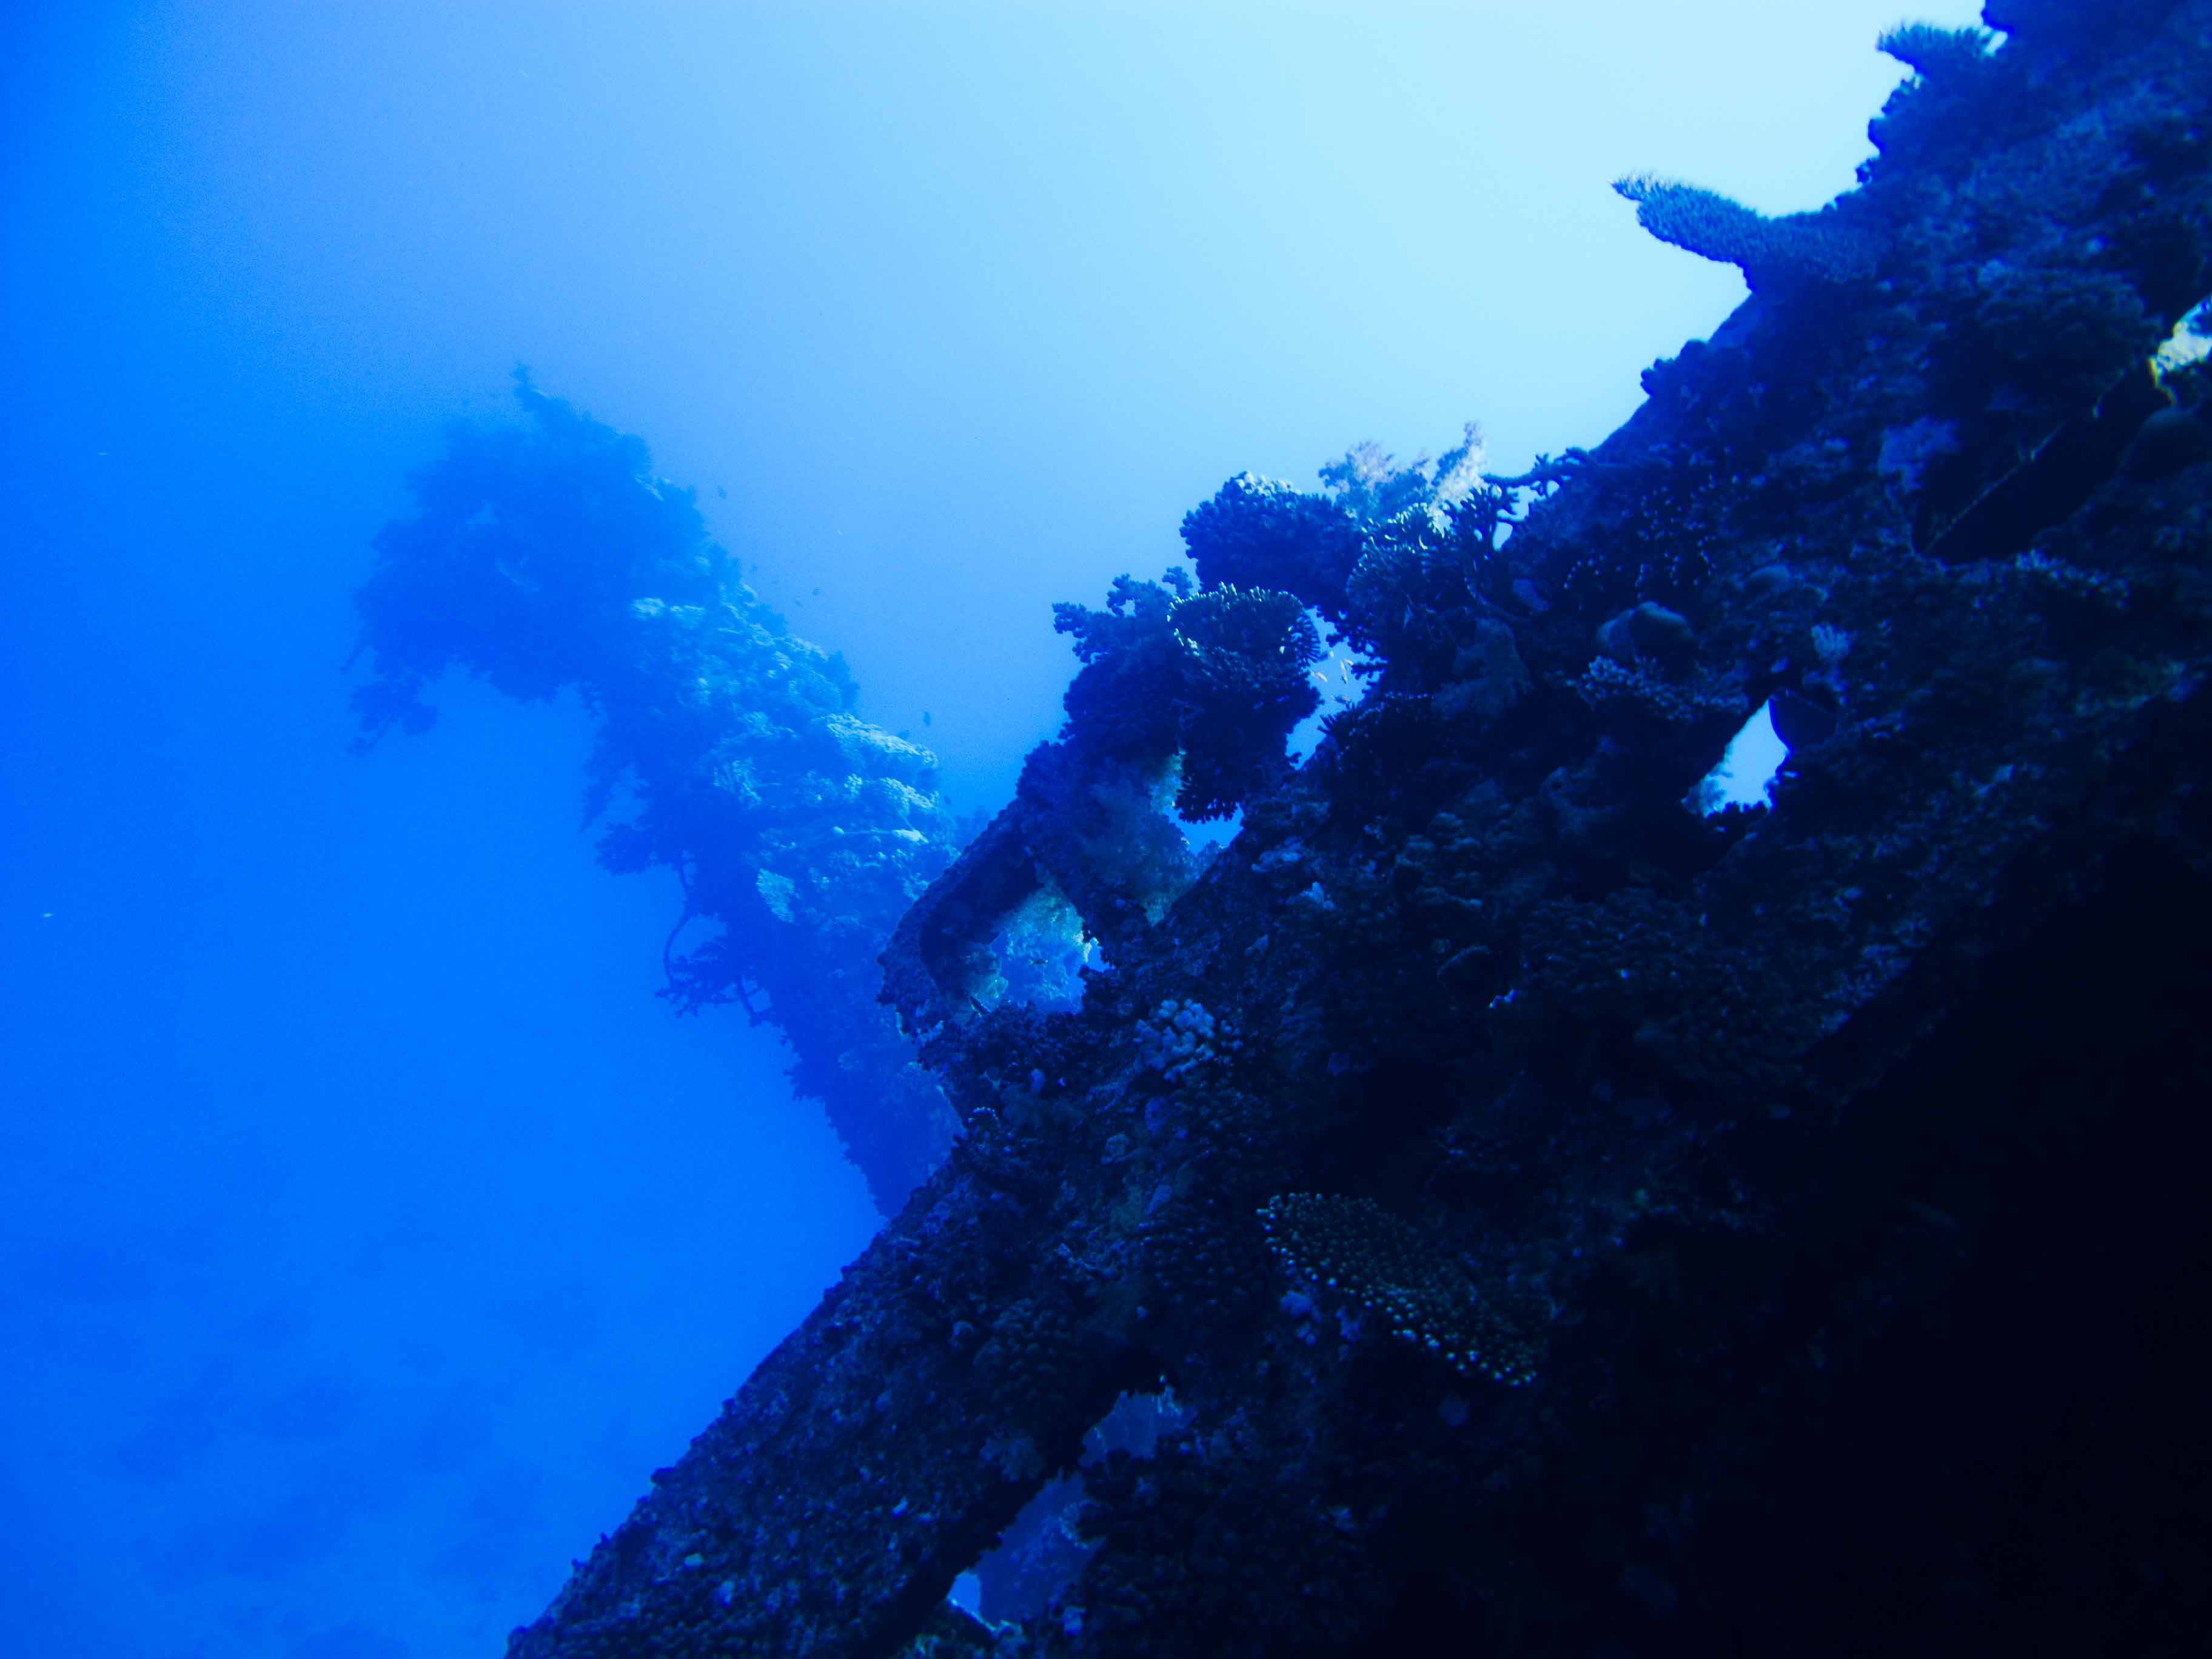 Wreck Diving in the Red Sea with Aquastars